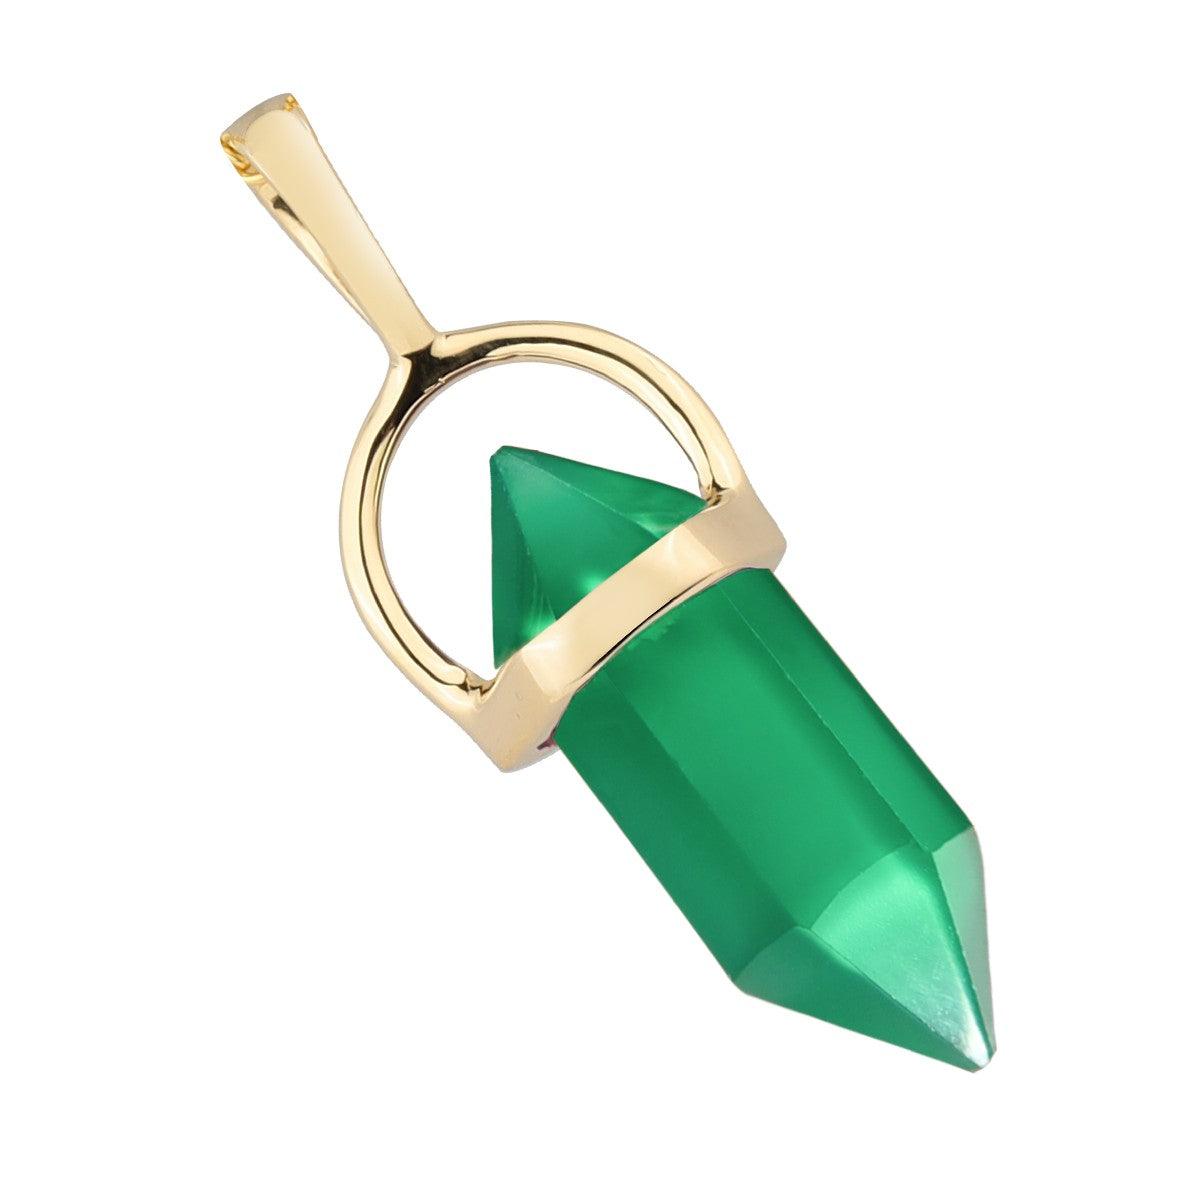 Green Onyx Pencil Necklace 14kt Gold Over Silver Chain Pendant Necklace - YoTreasure